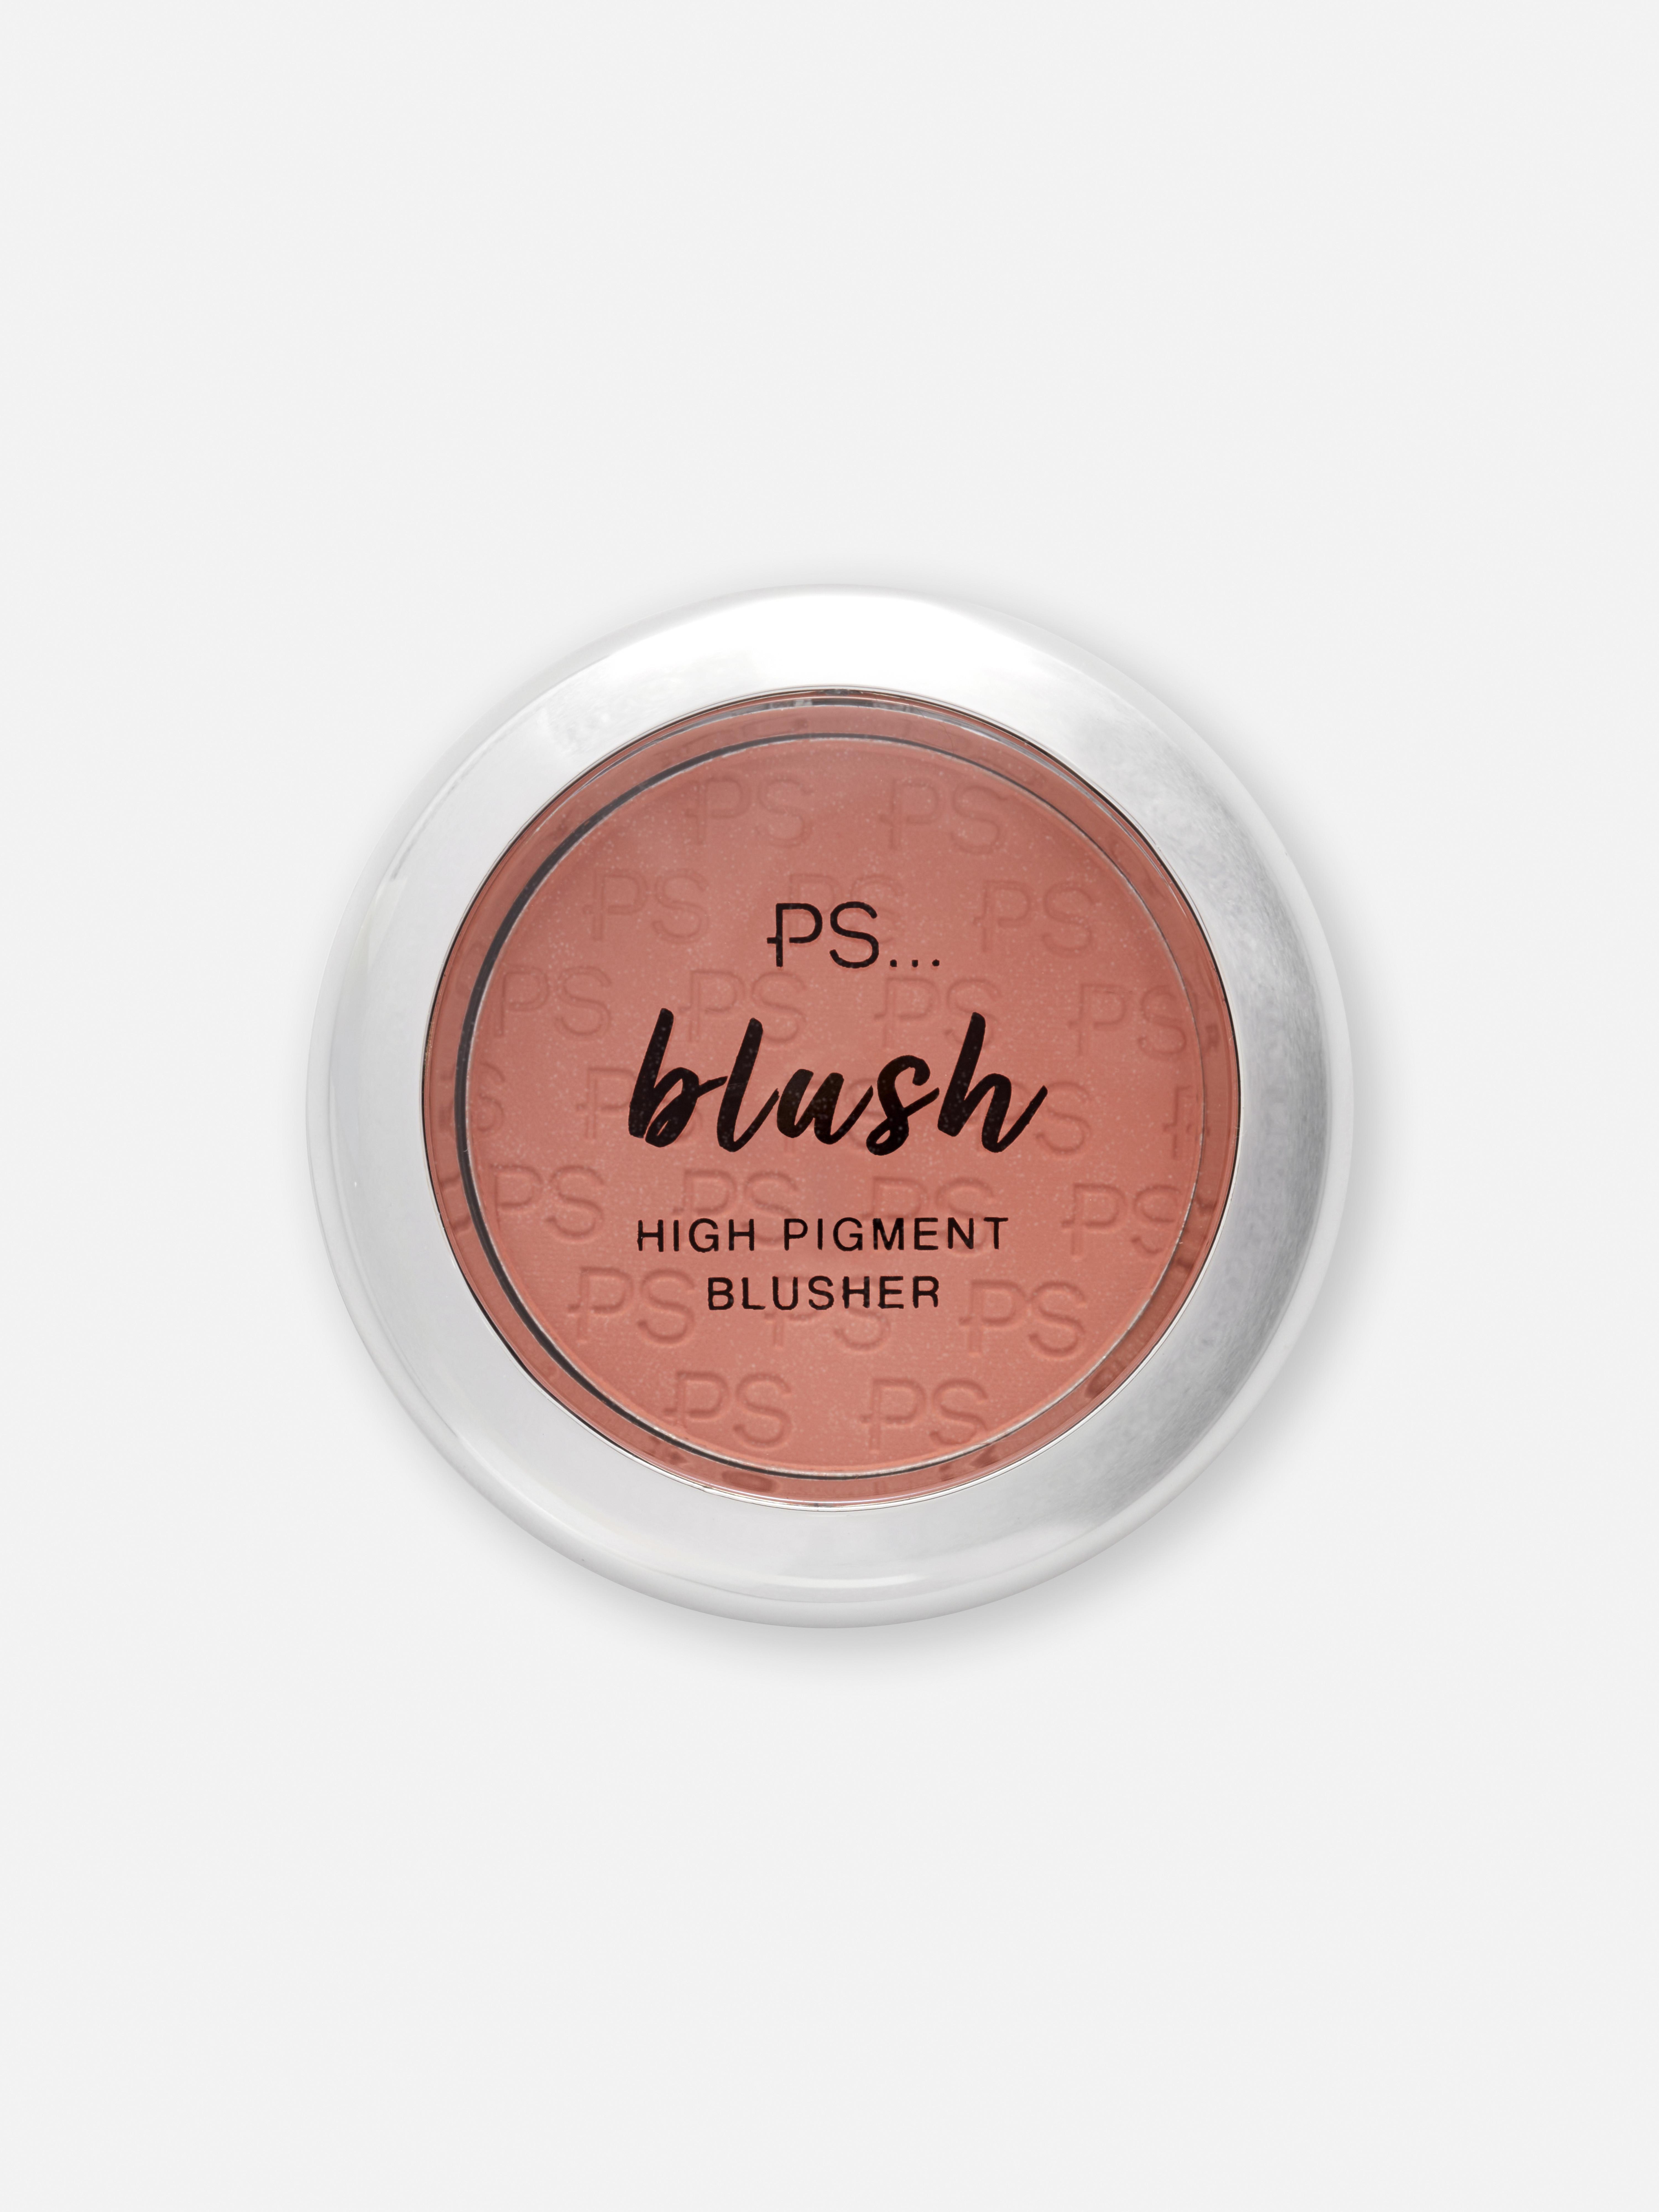 PS High Pigment Blusher